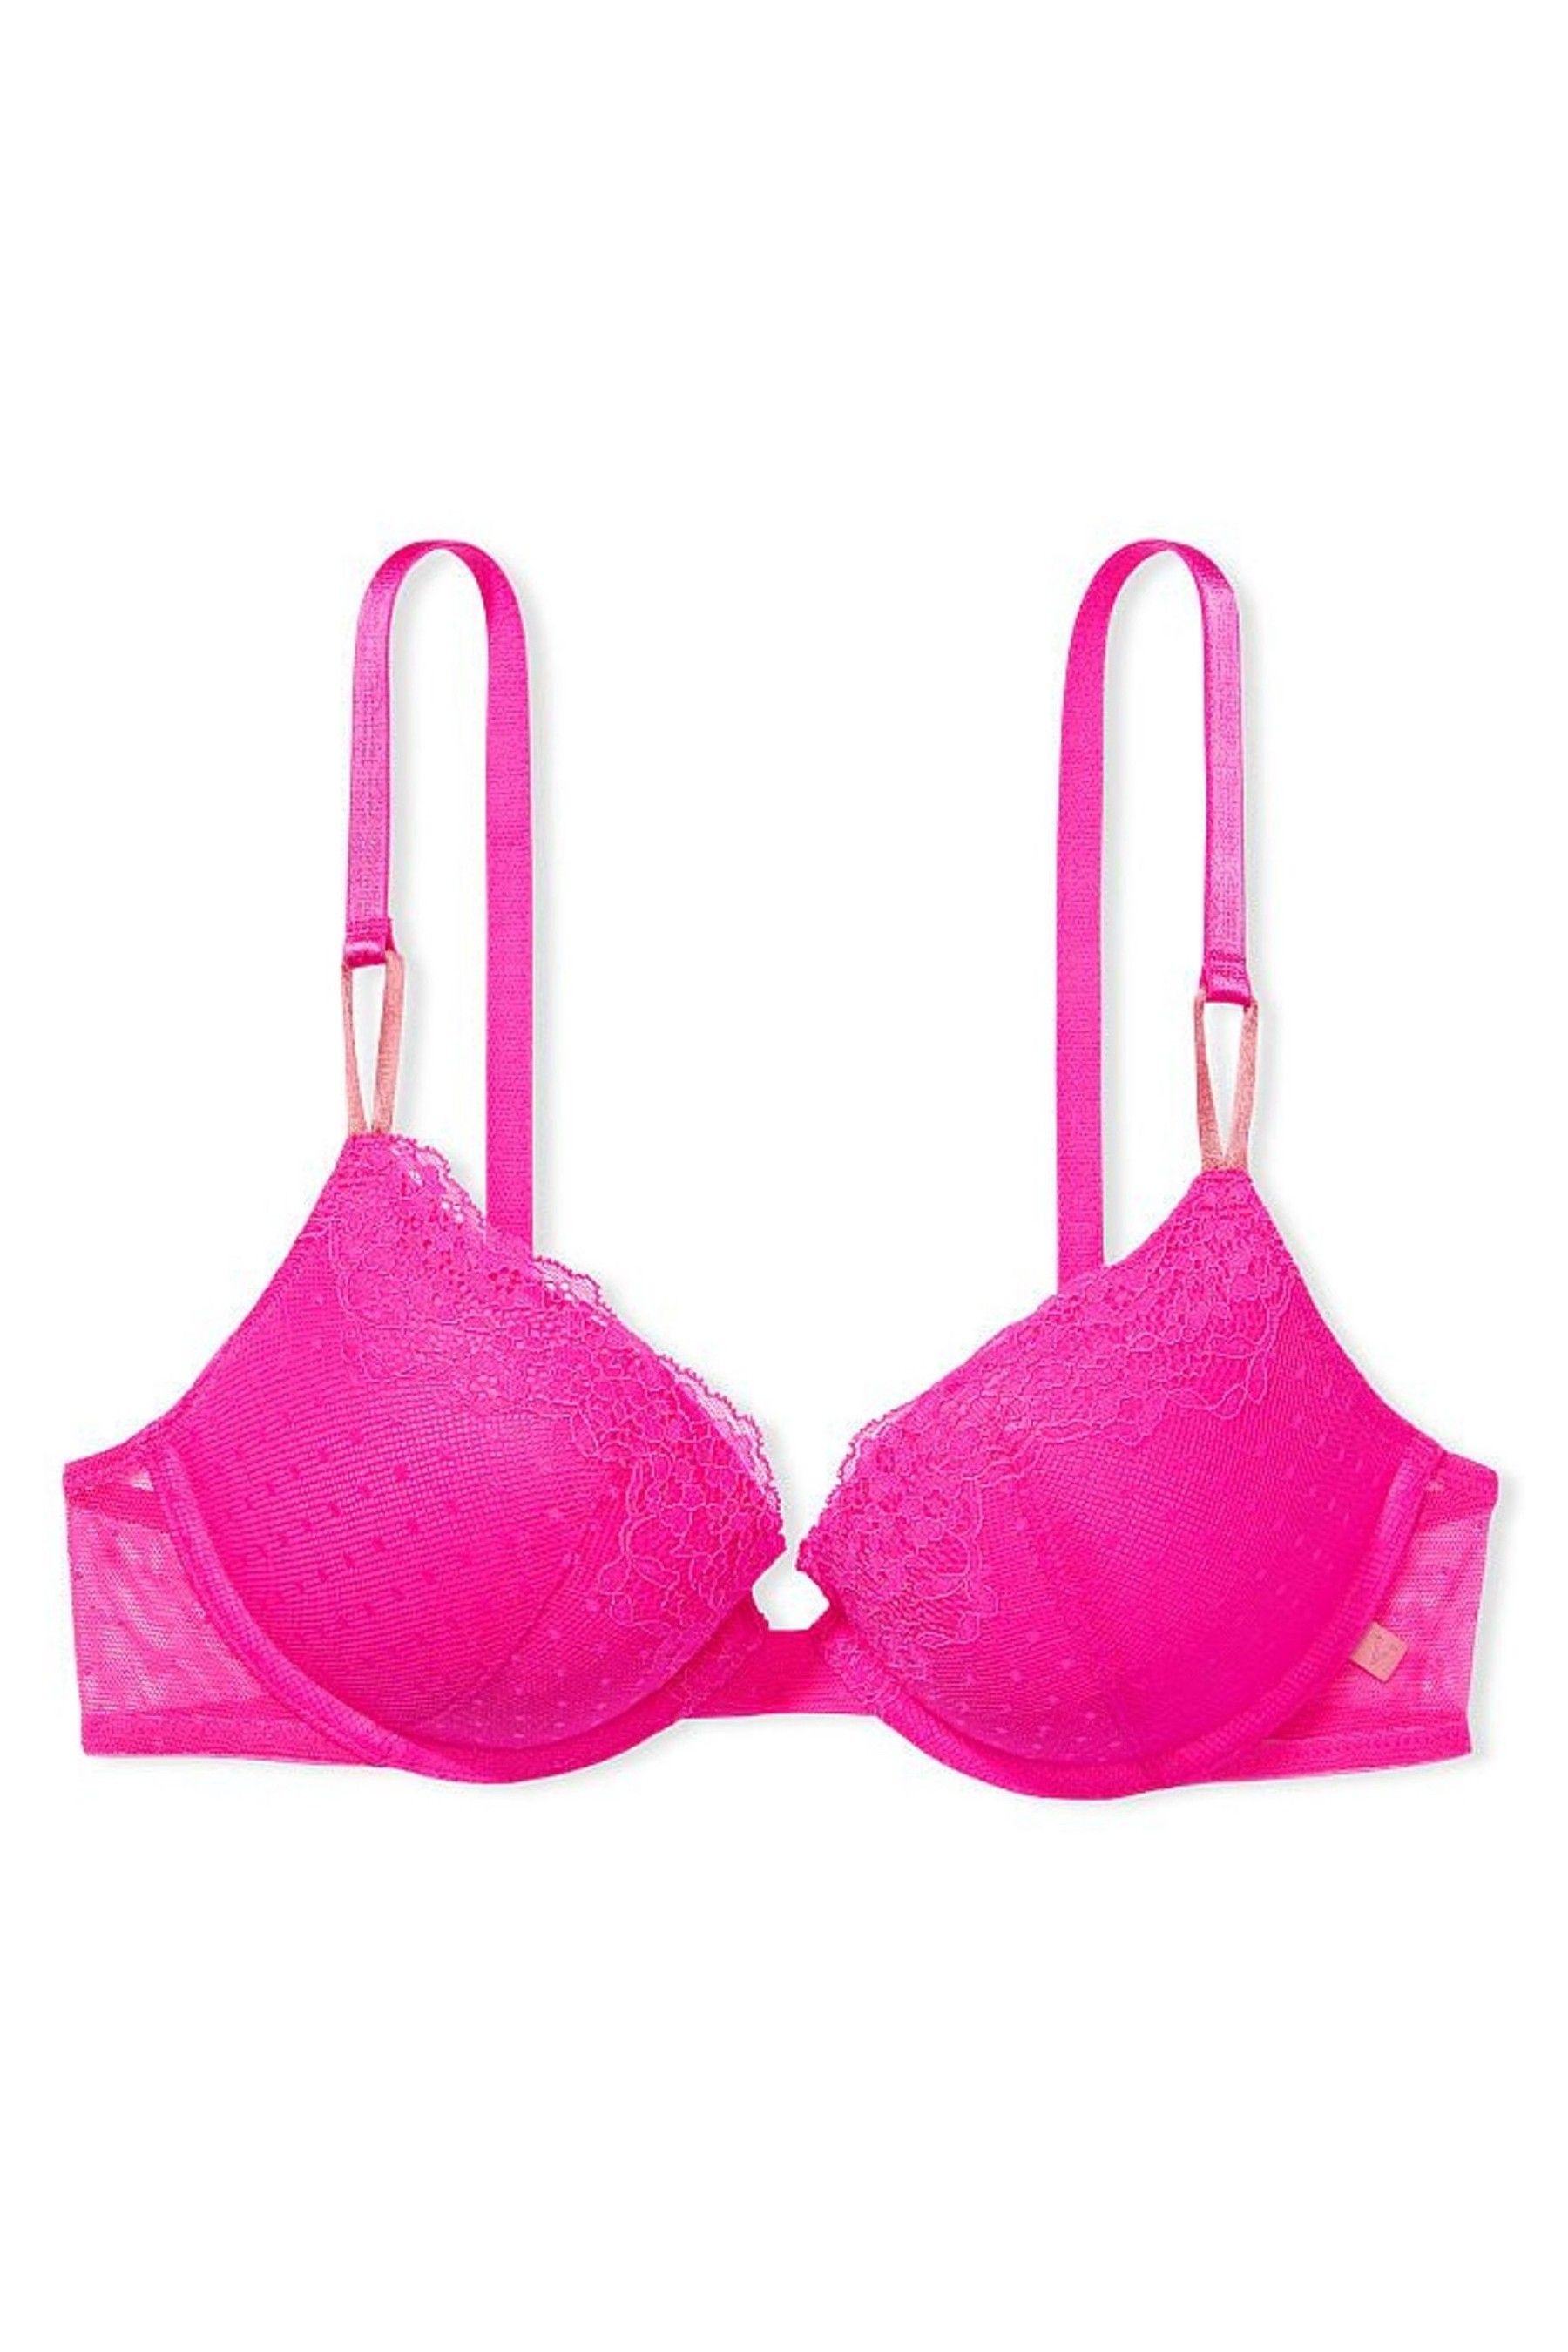 Buy Victoria's Secret Pink Fever Lace Push Up T-Shirt Bra from the ...